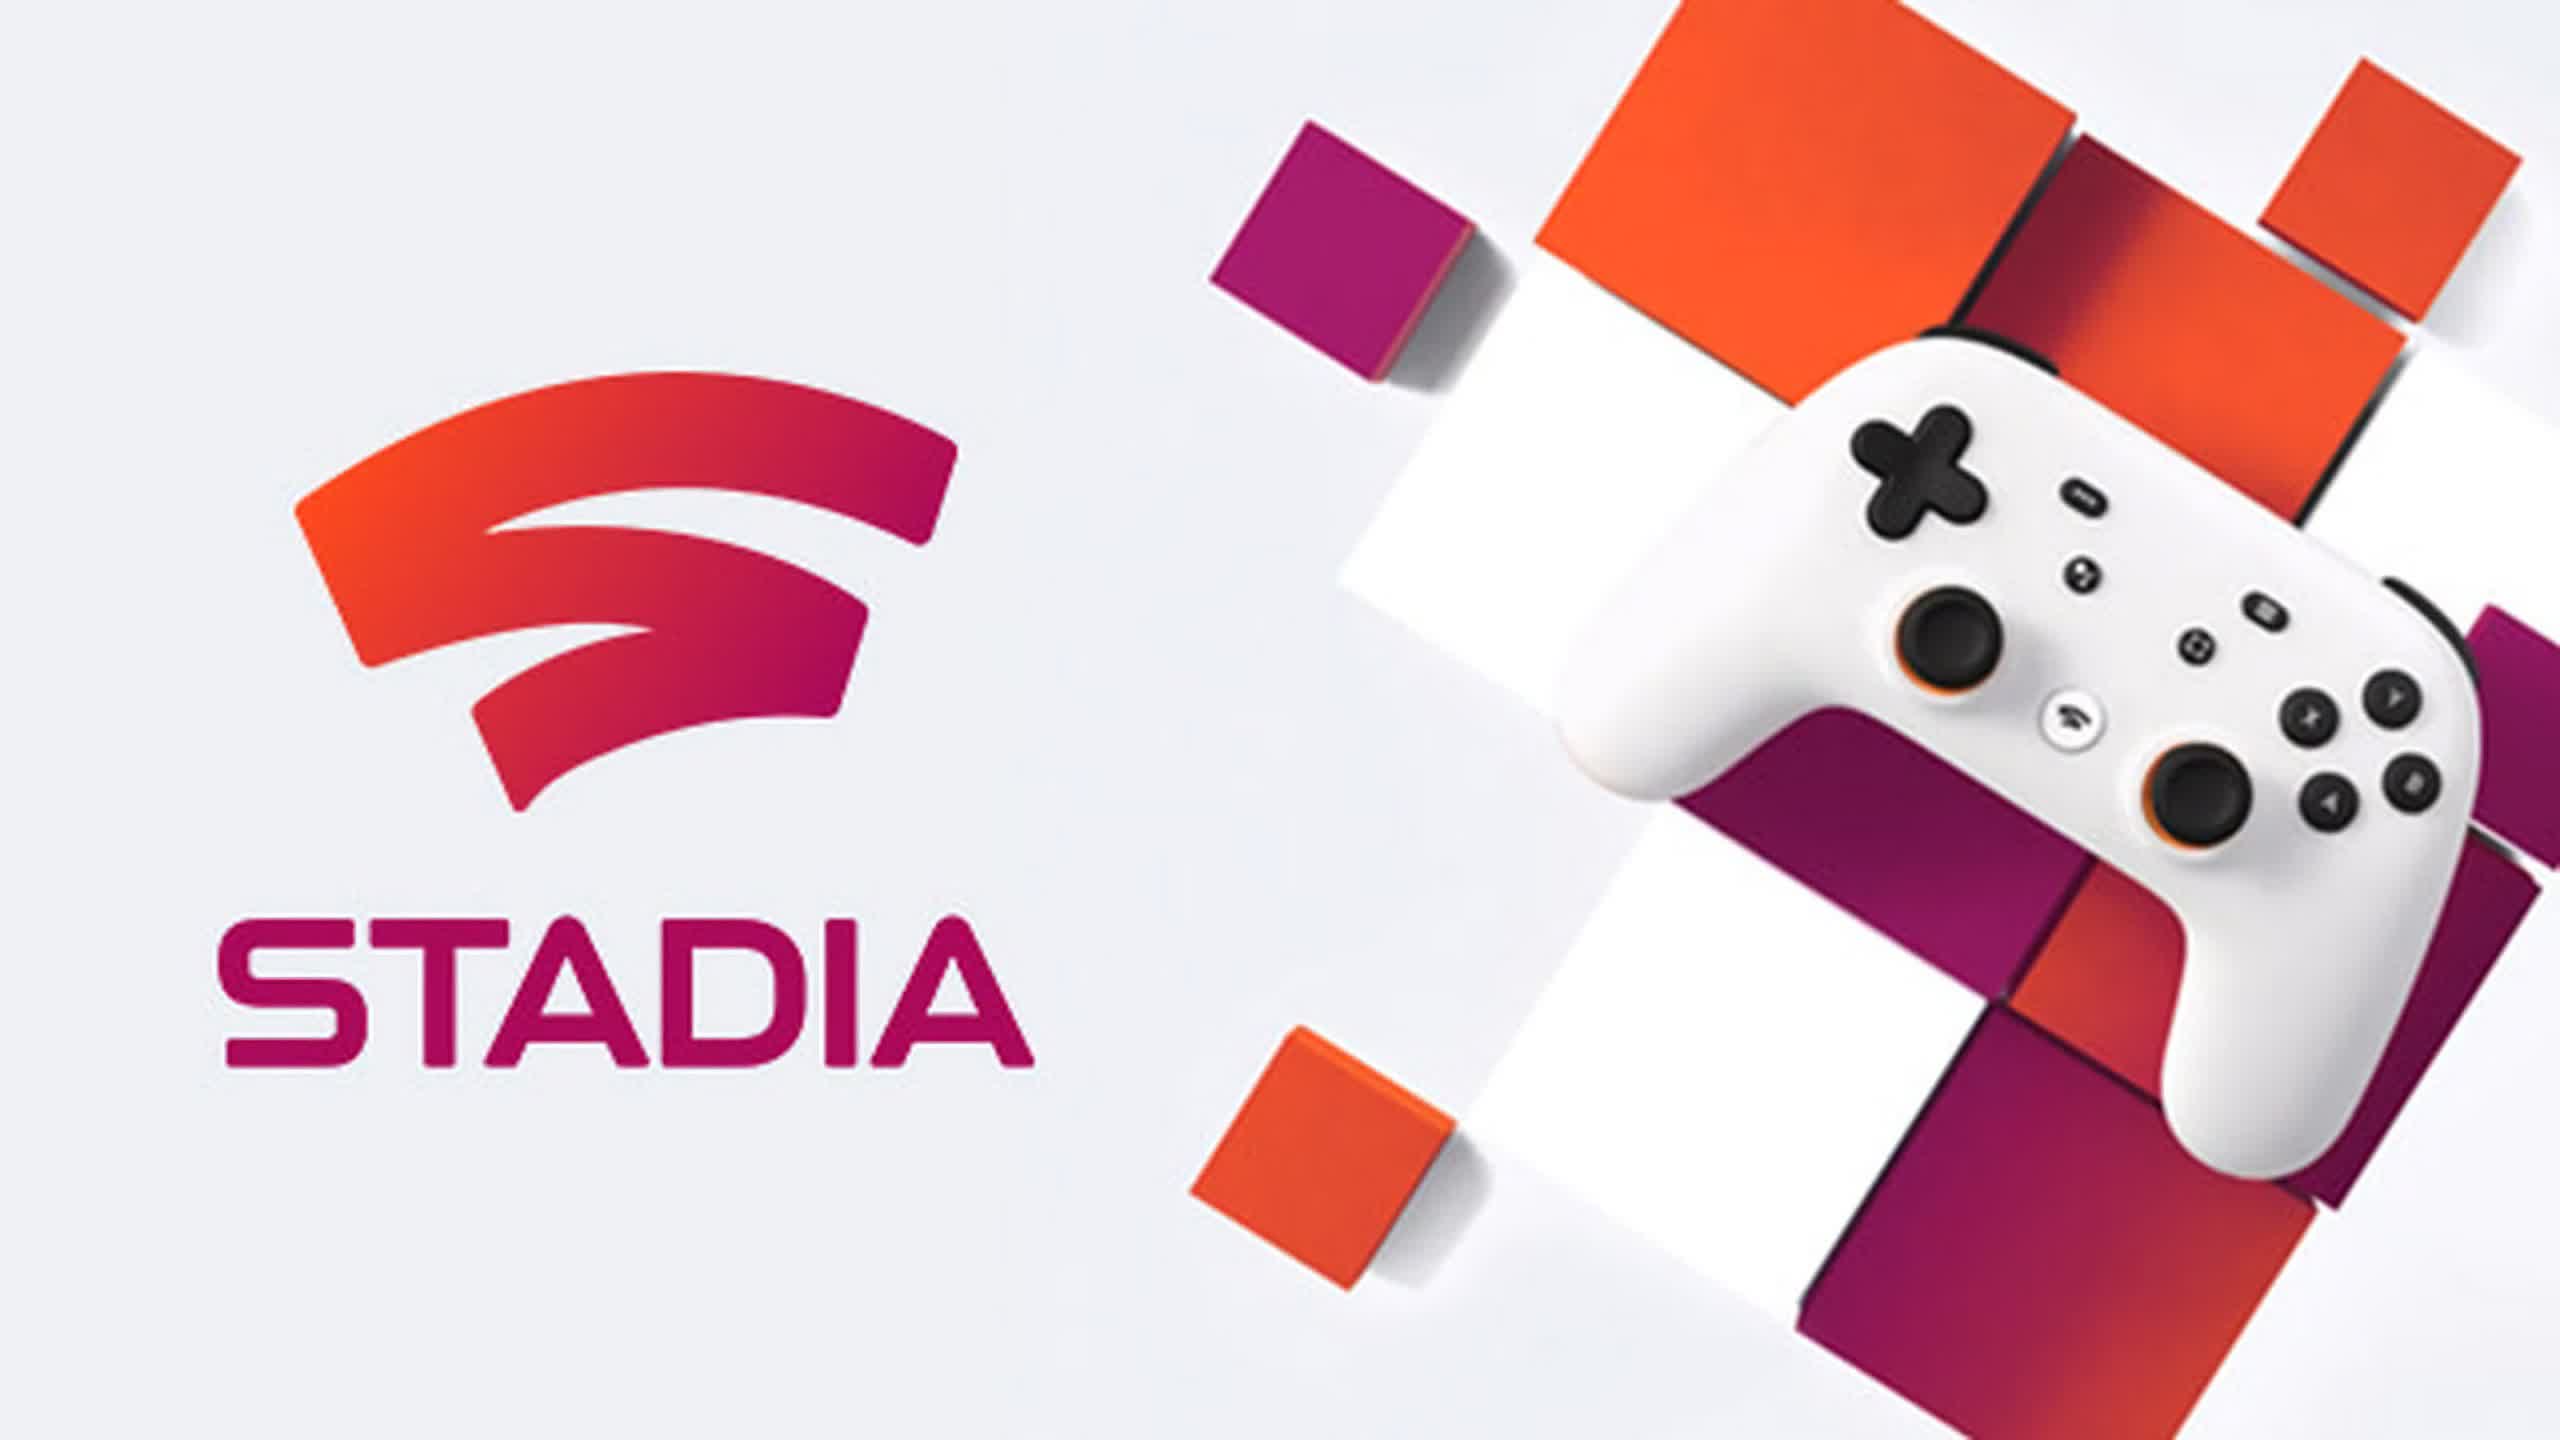 Google Stadia gets 'direct' to YouTube livestreaming this week